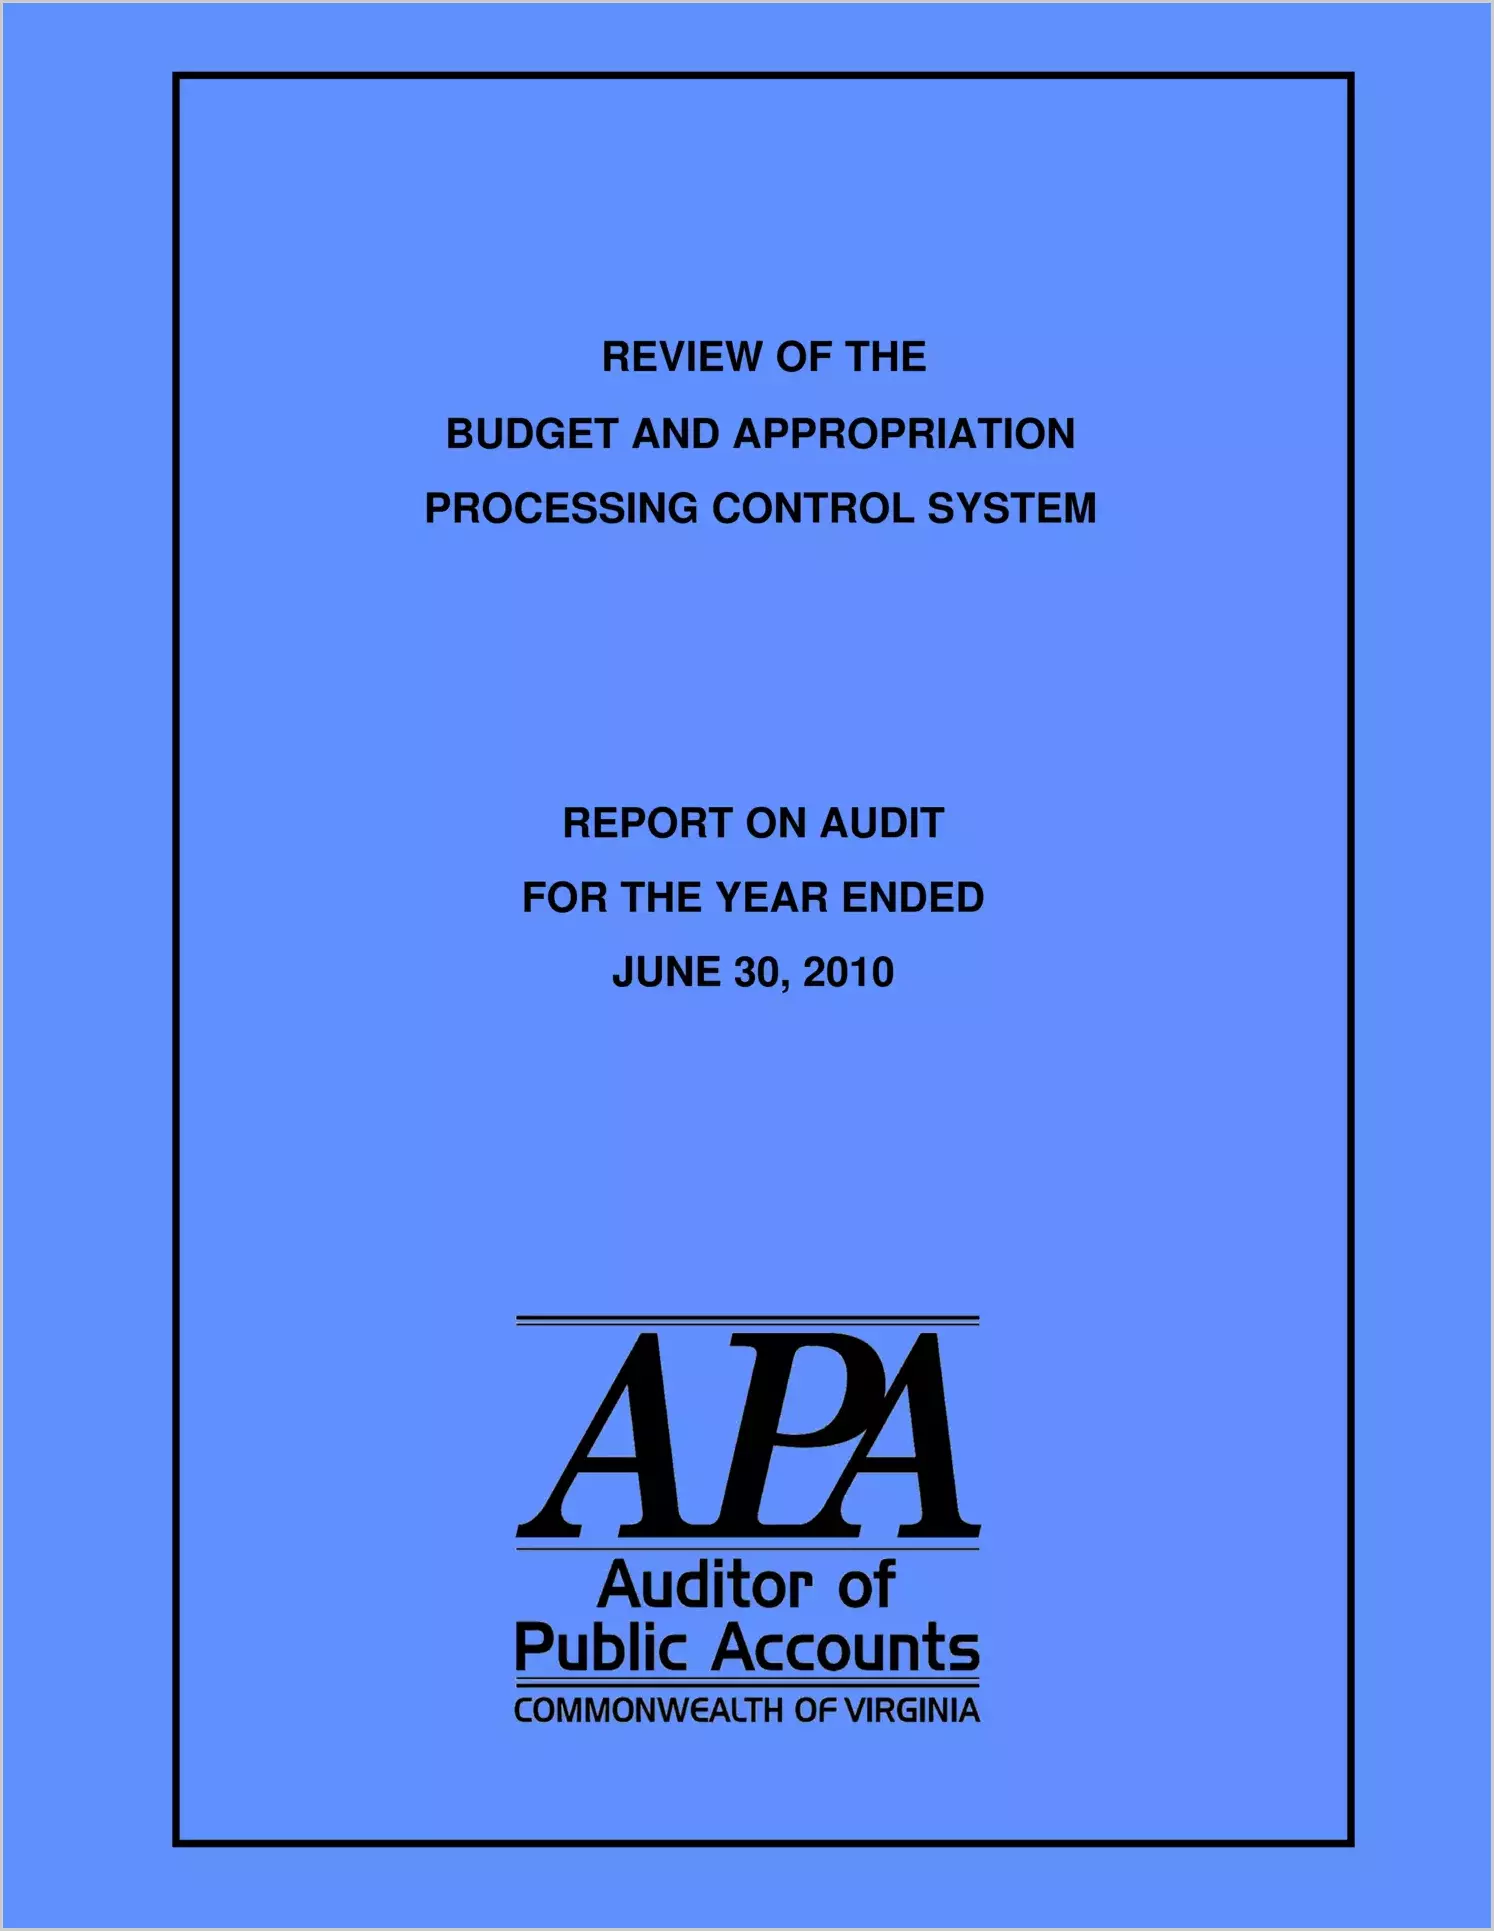 Review of the Budget and Appropriation Processing Control System for the fiscal year ended June 30, 2010